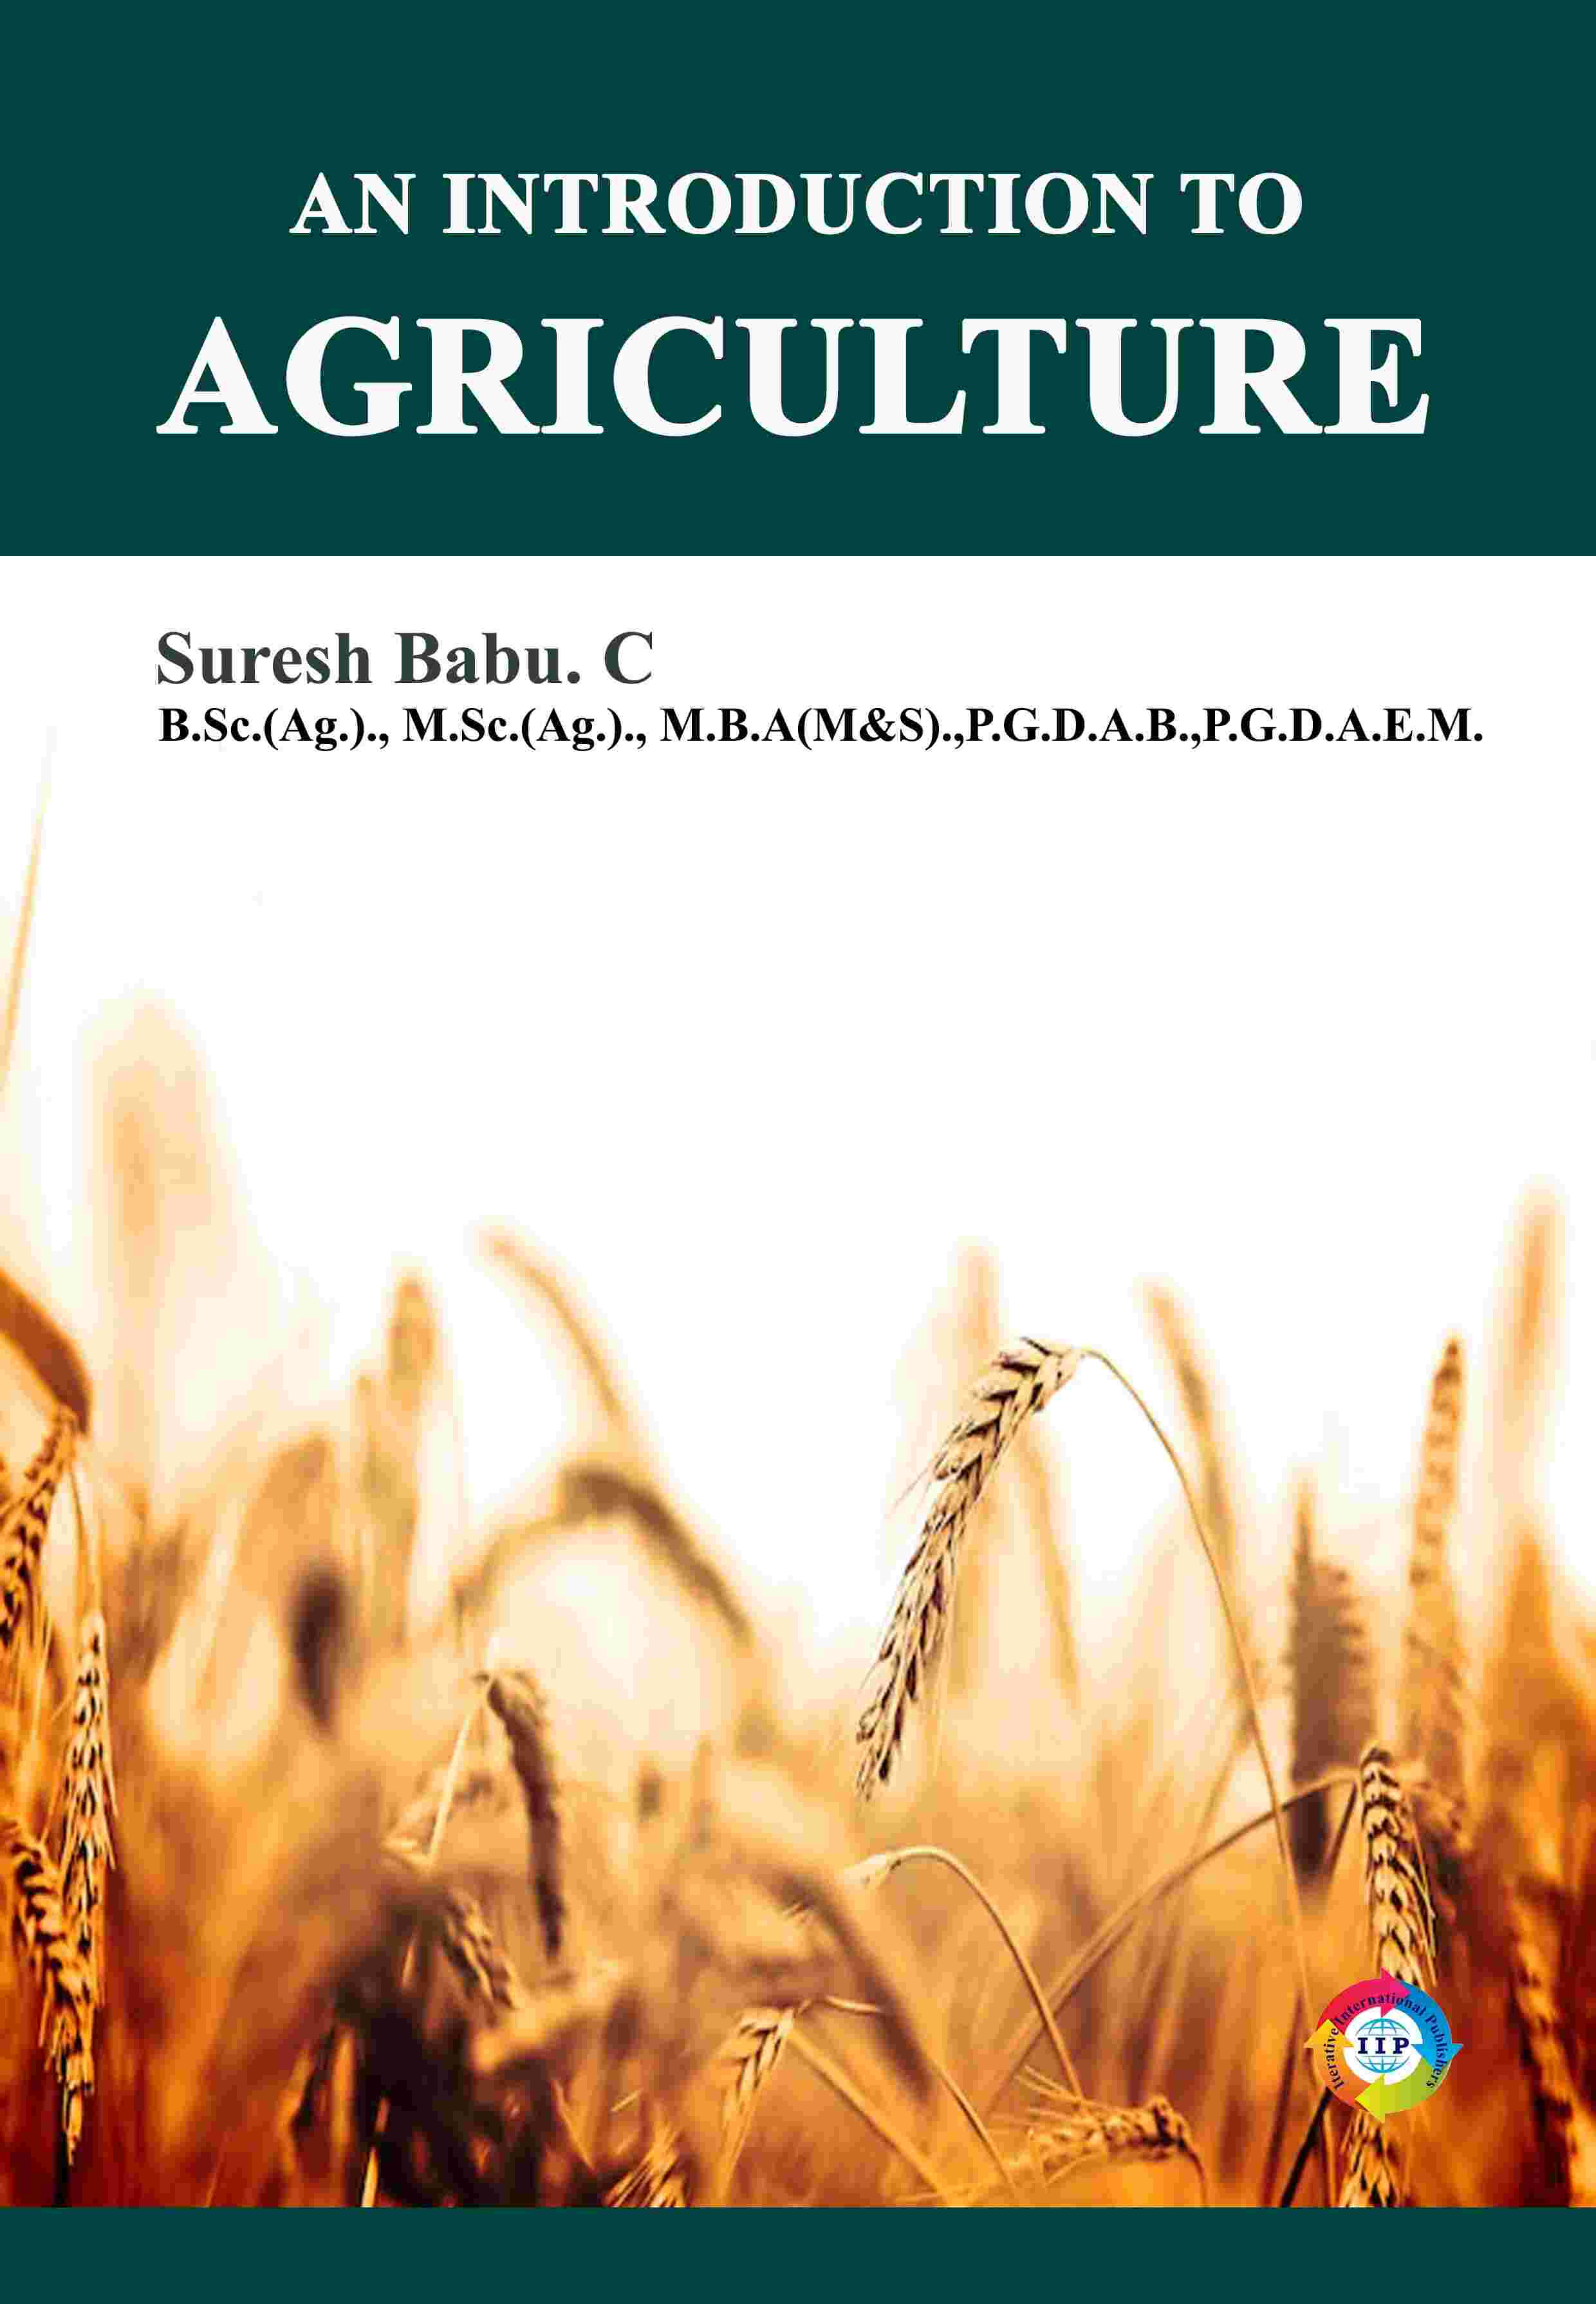 AN INTRODUCTION TO AGRICULTURE